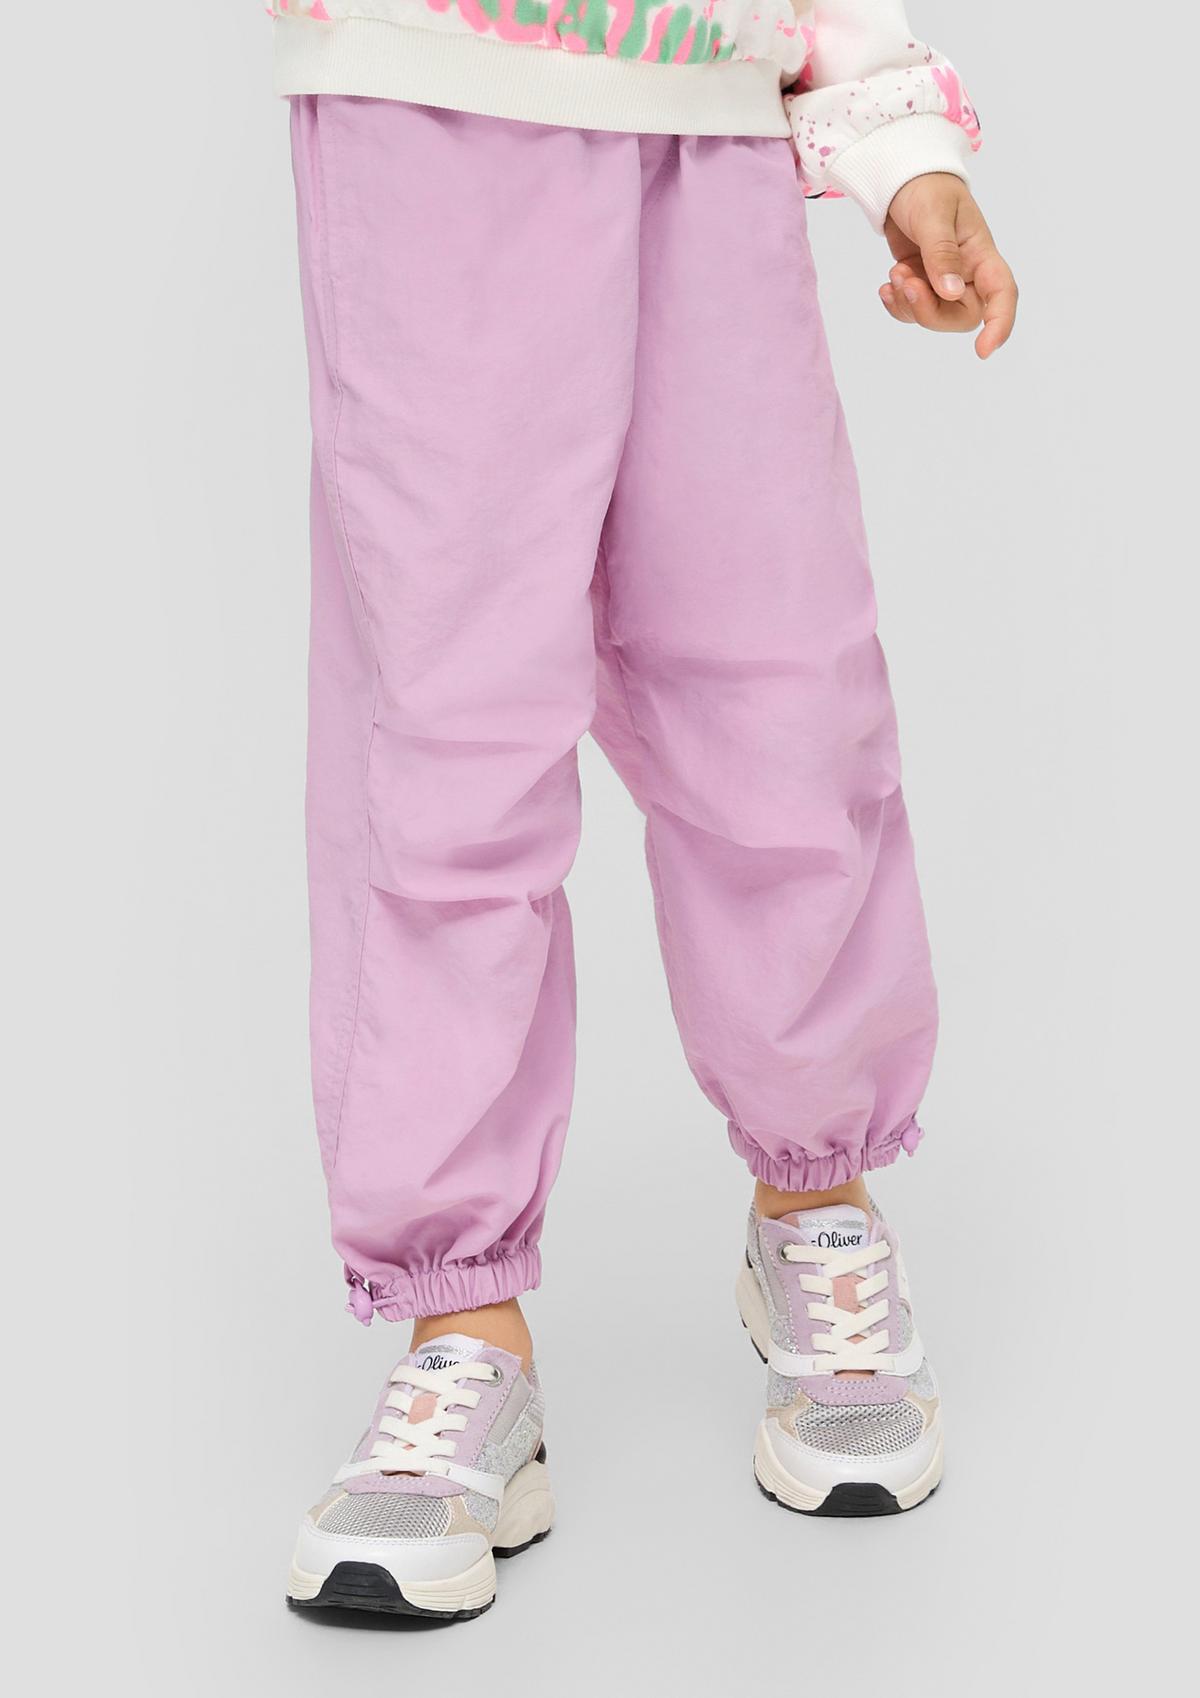 Parachute trousers with a high waistband